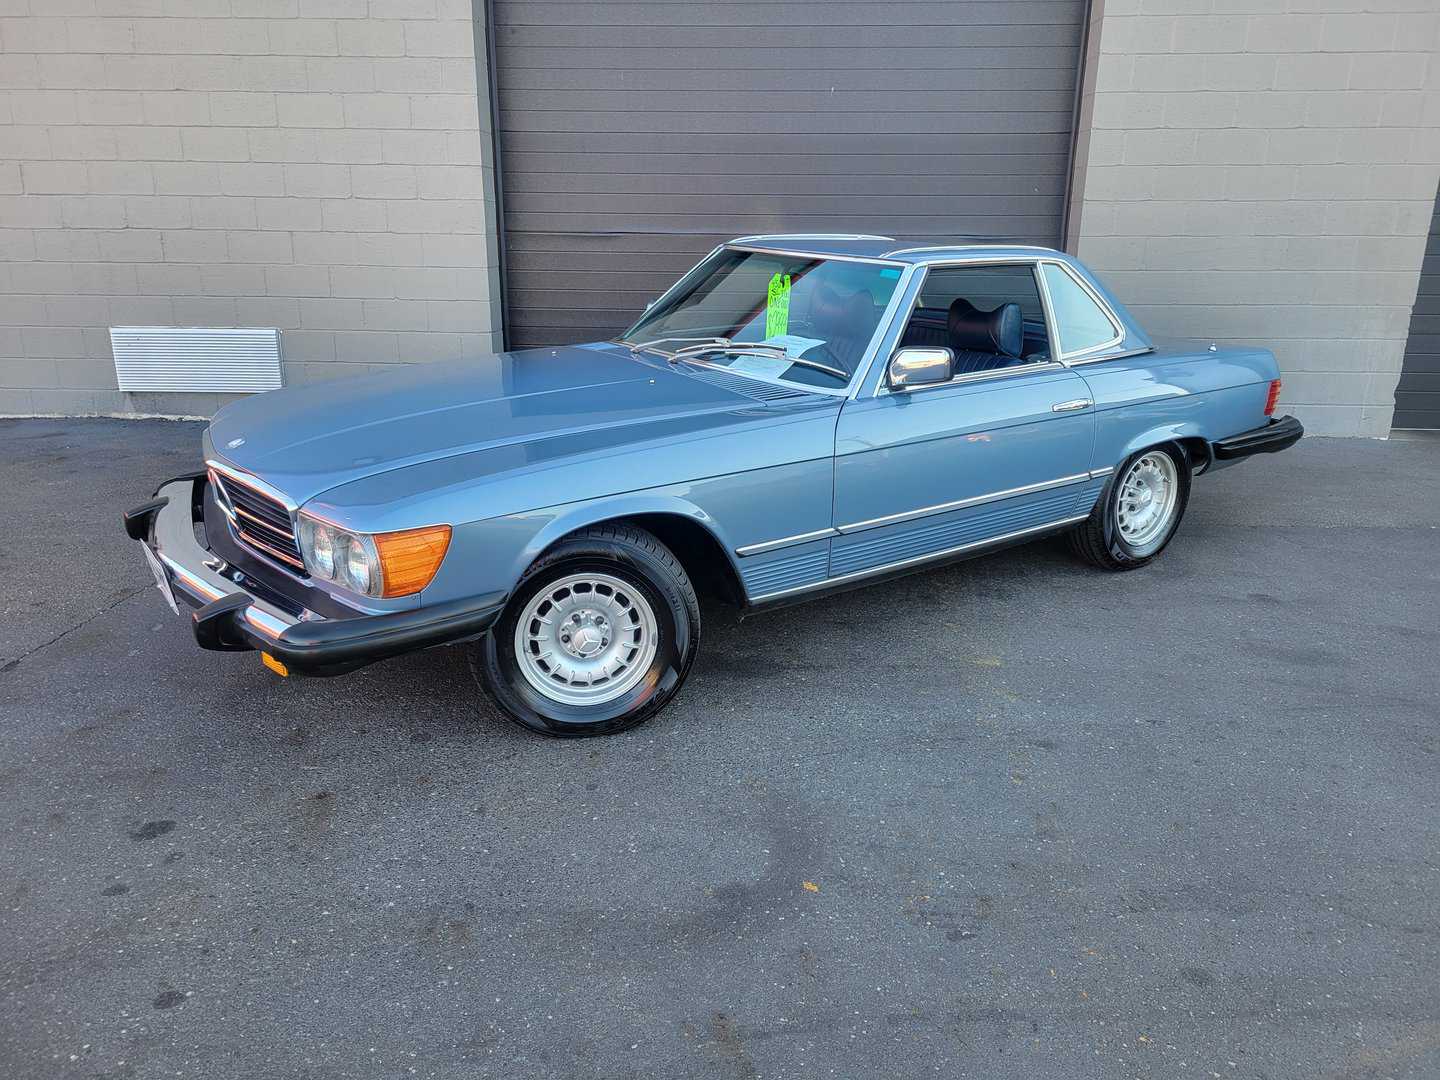 A Blue Mercedes Benz 450 Sl Is Parked In Front Of A Garage.